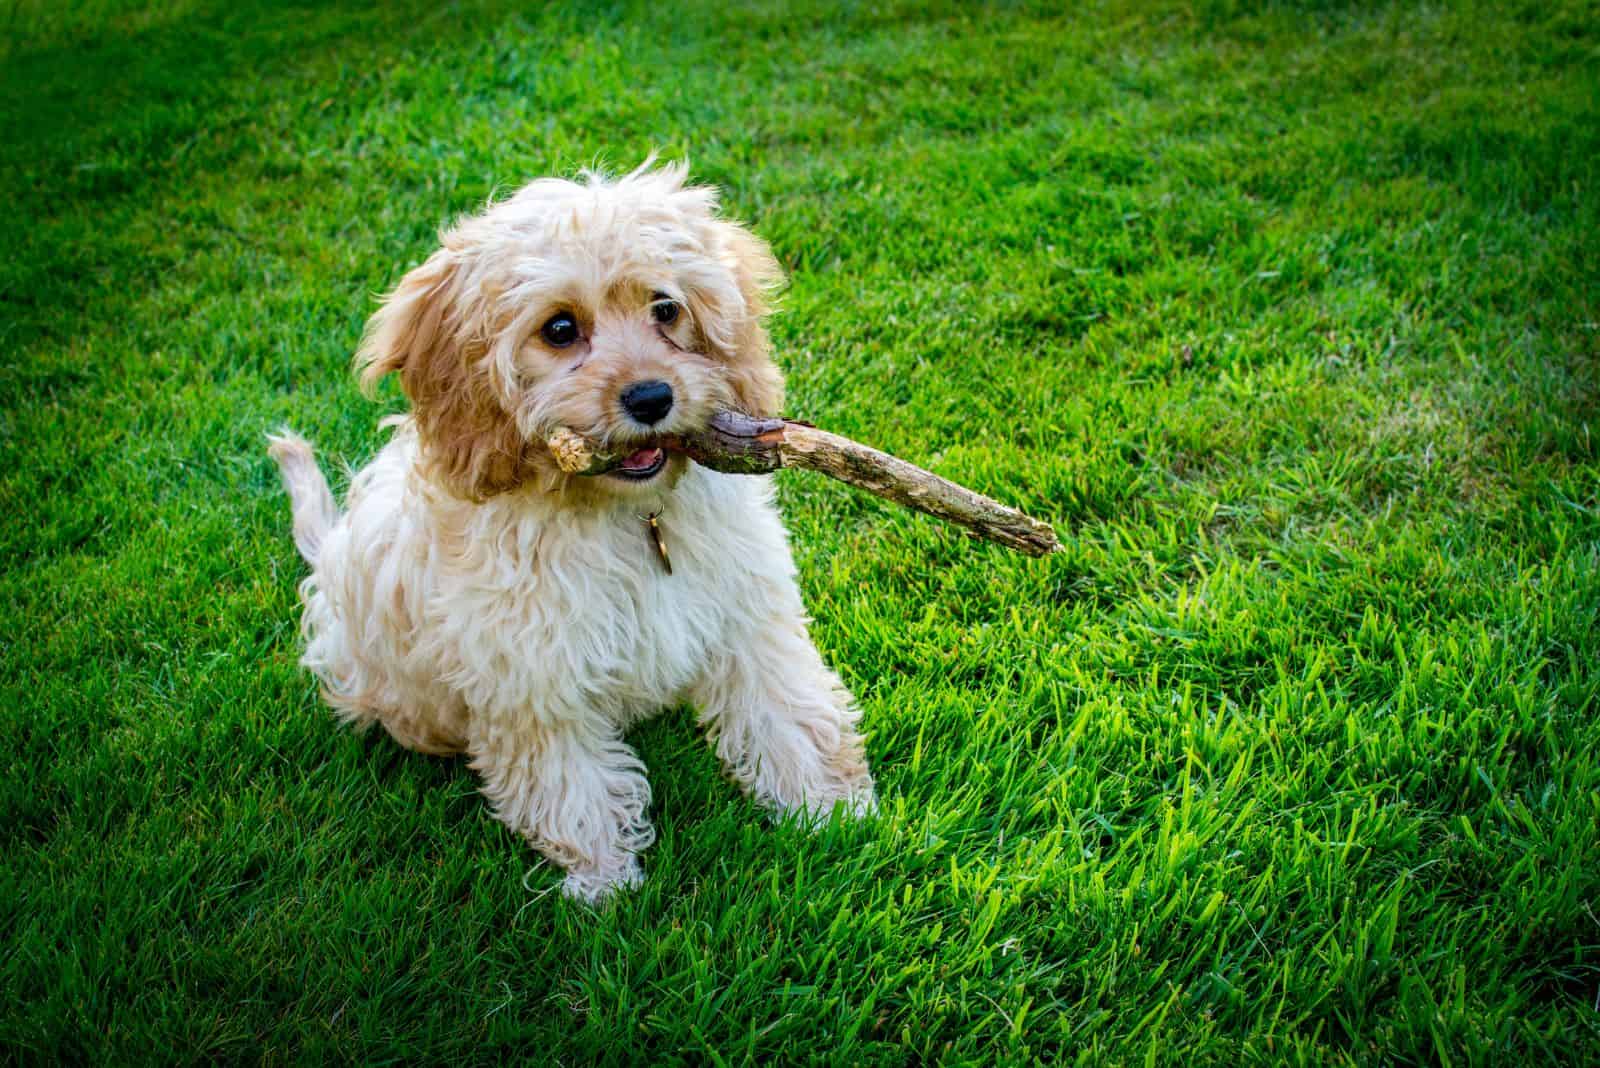 A Cavapoo is sitting on the grass with a tree in its mouth